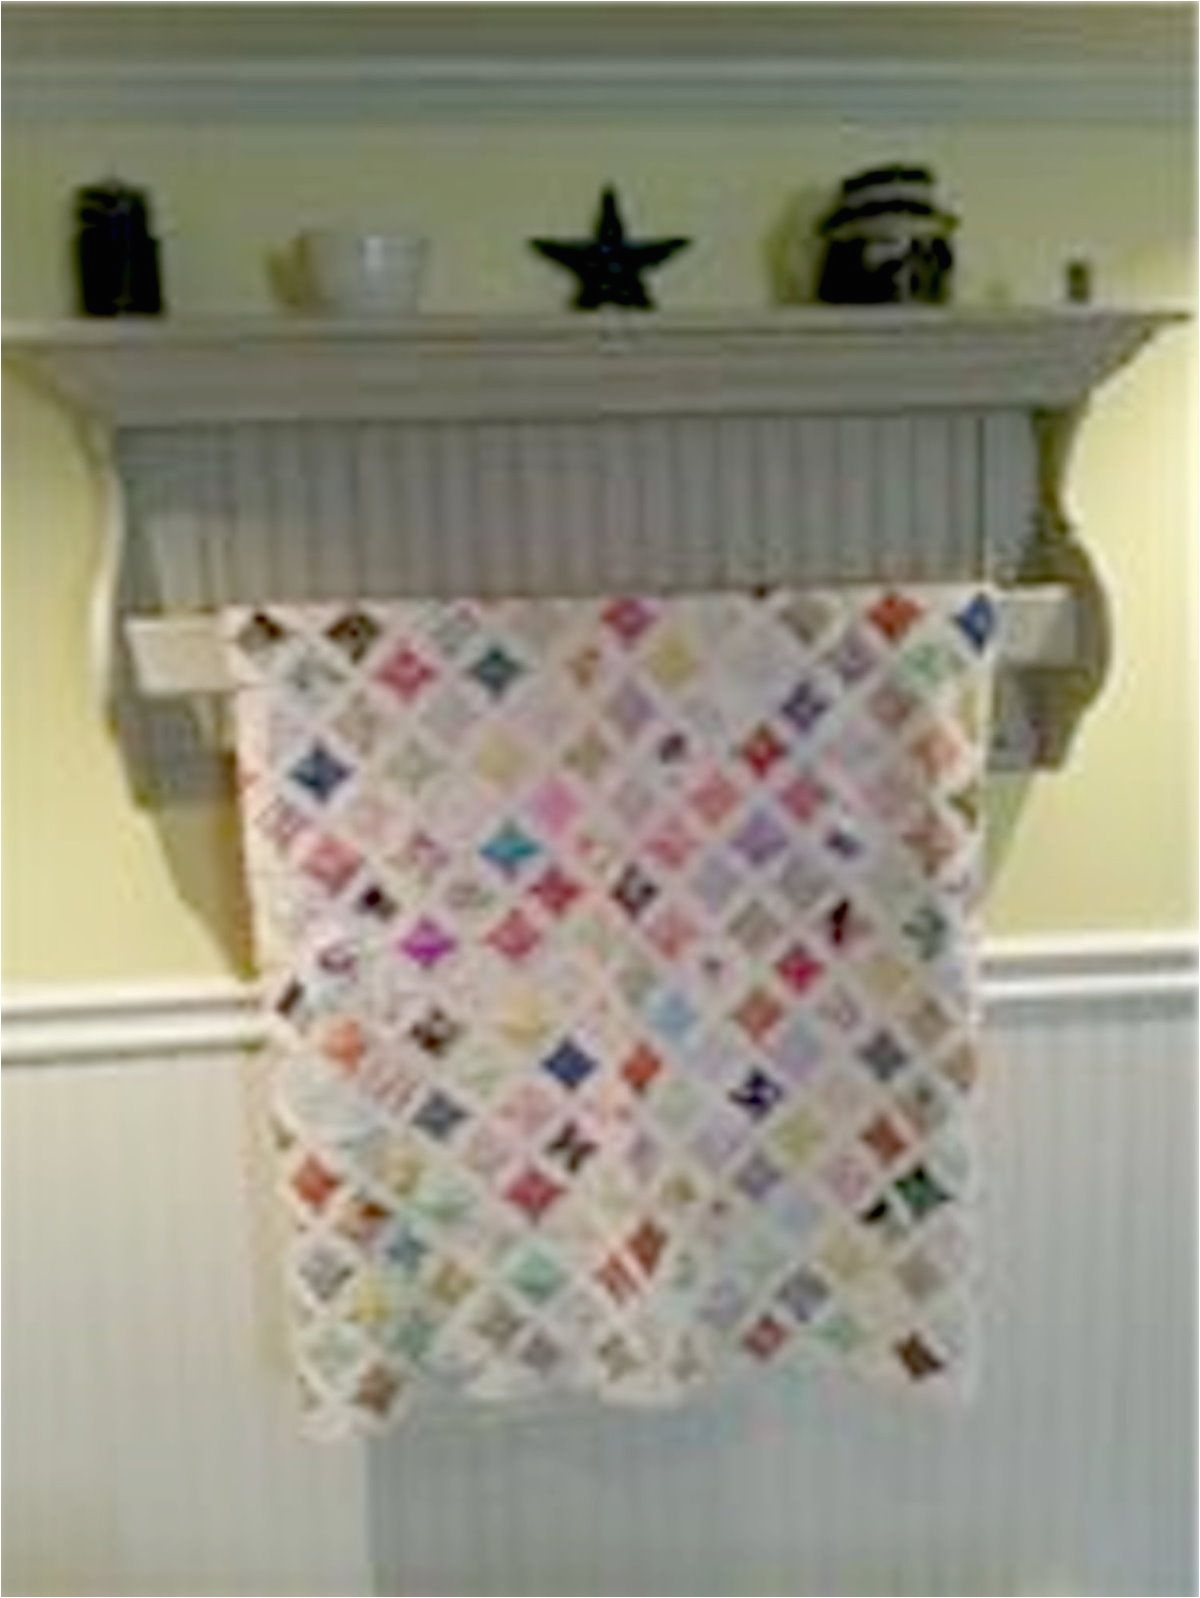 quilt rack but better in kitchen for towels and show off items